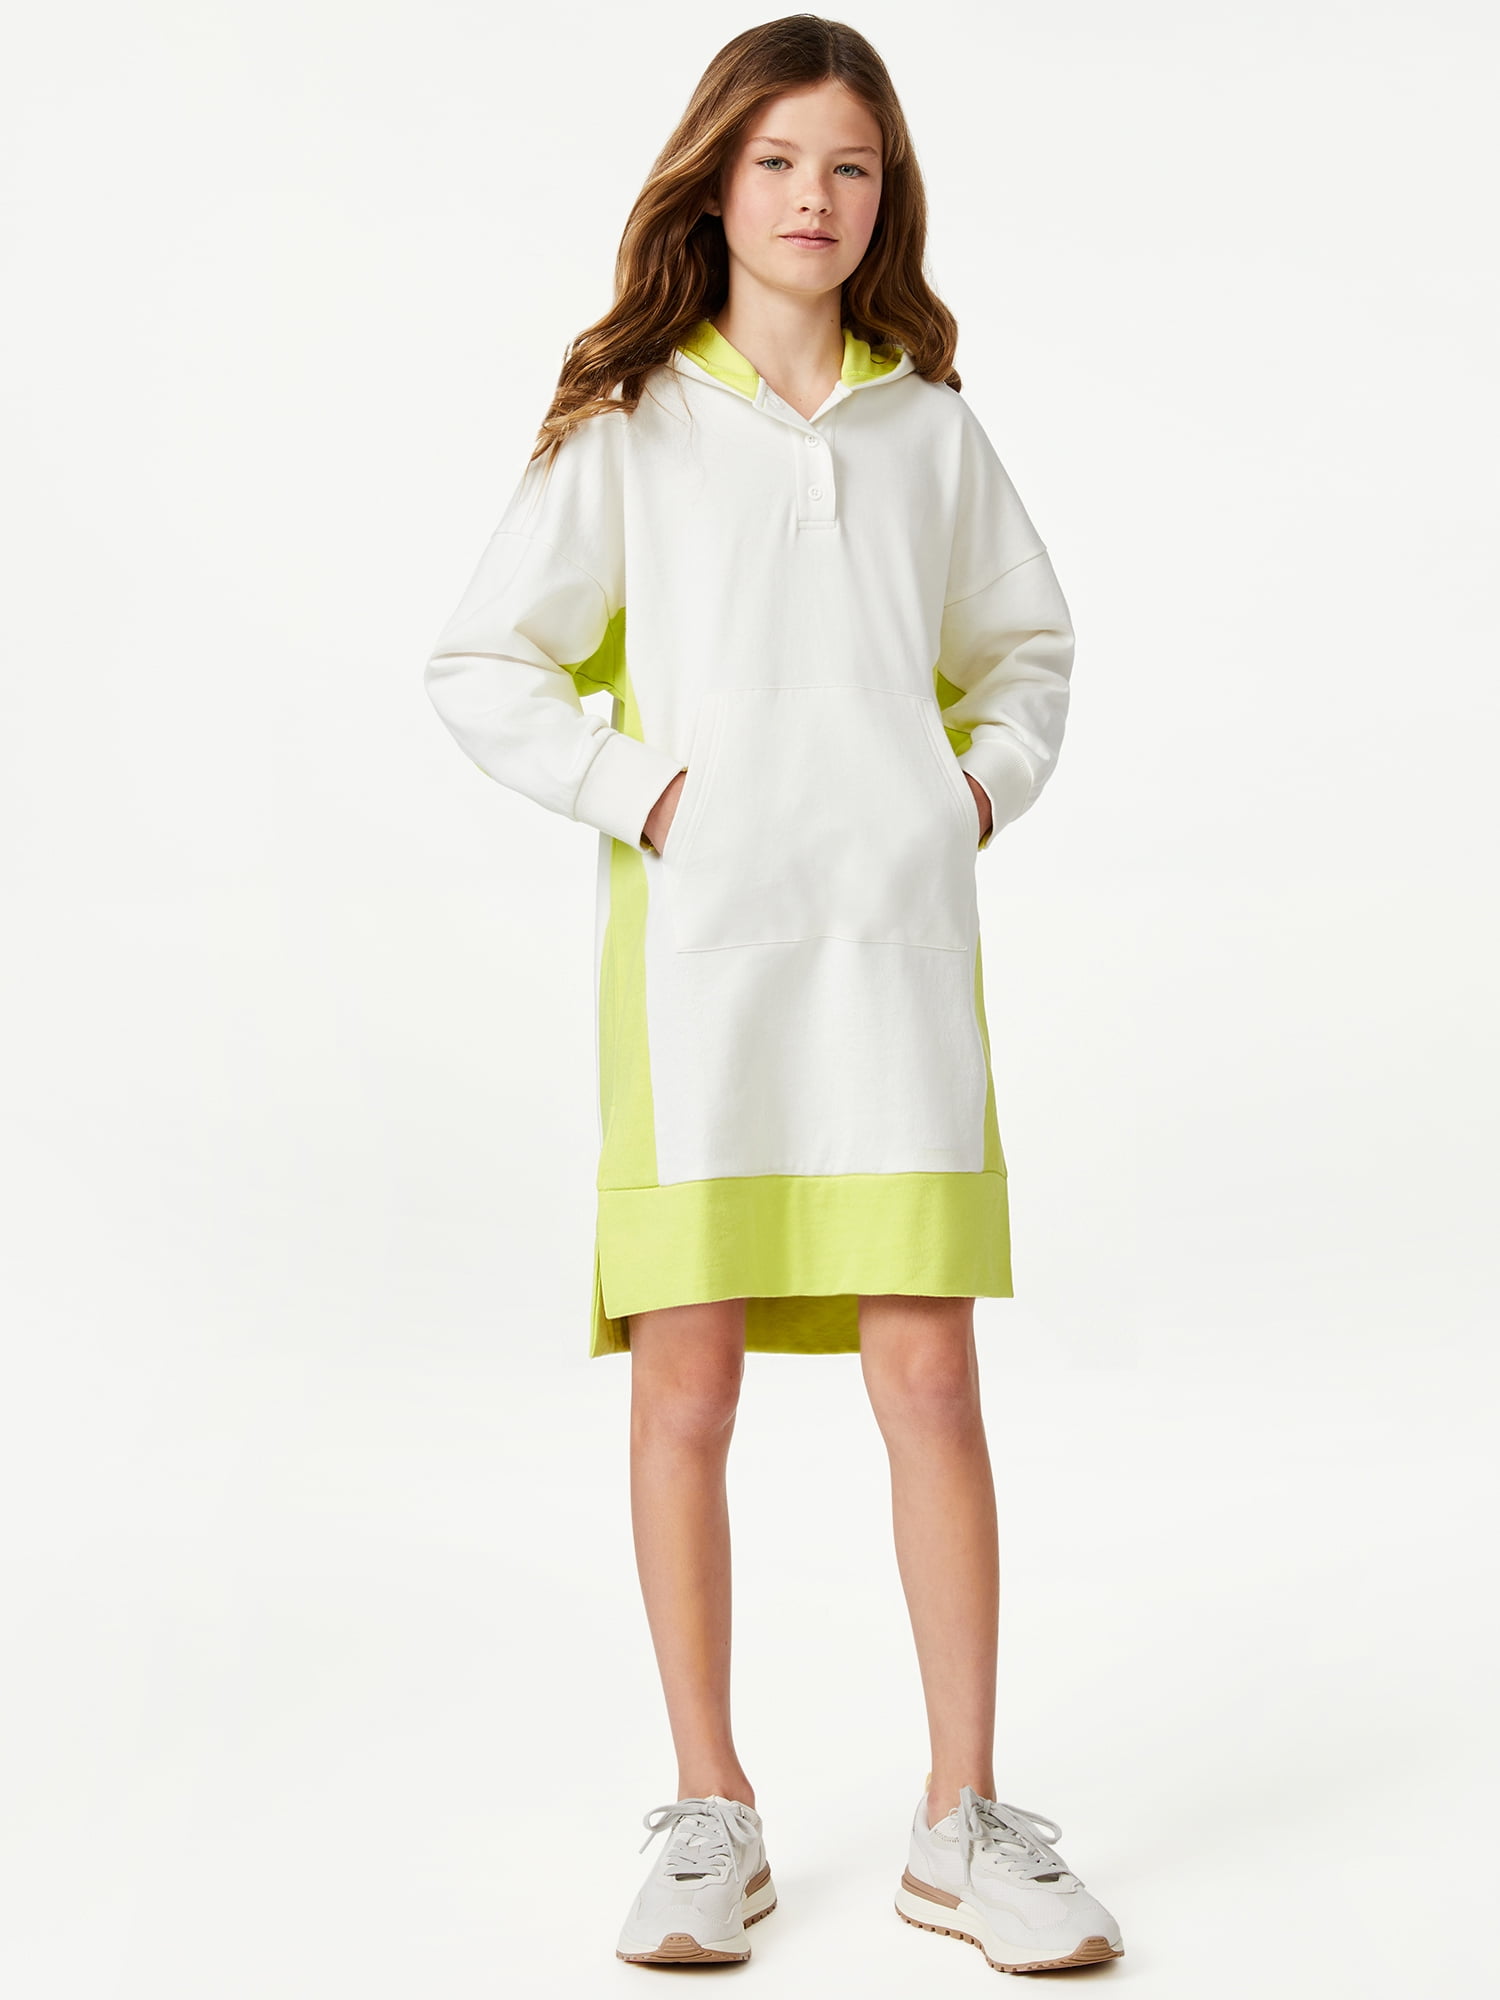 Free Assembly Girls Color Block Hoodie Dress, Sizes 4-18